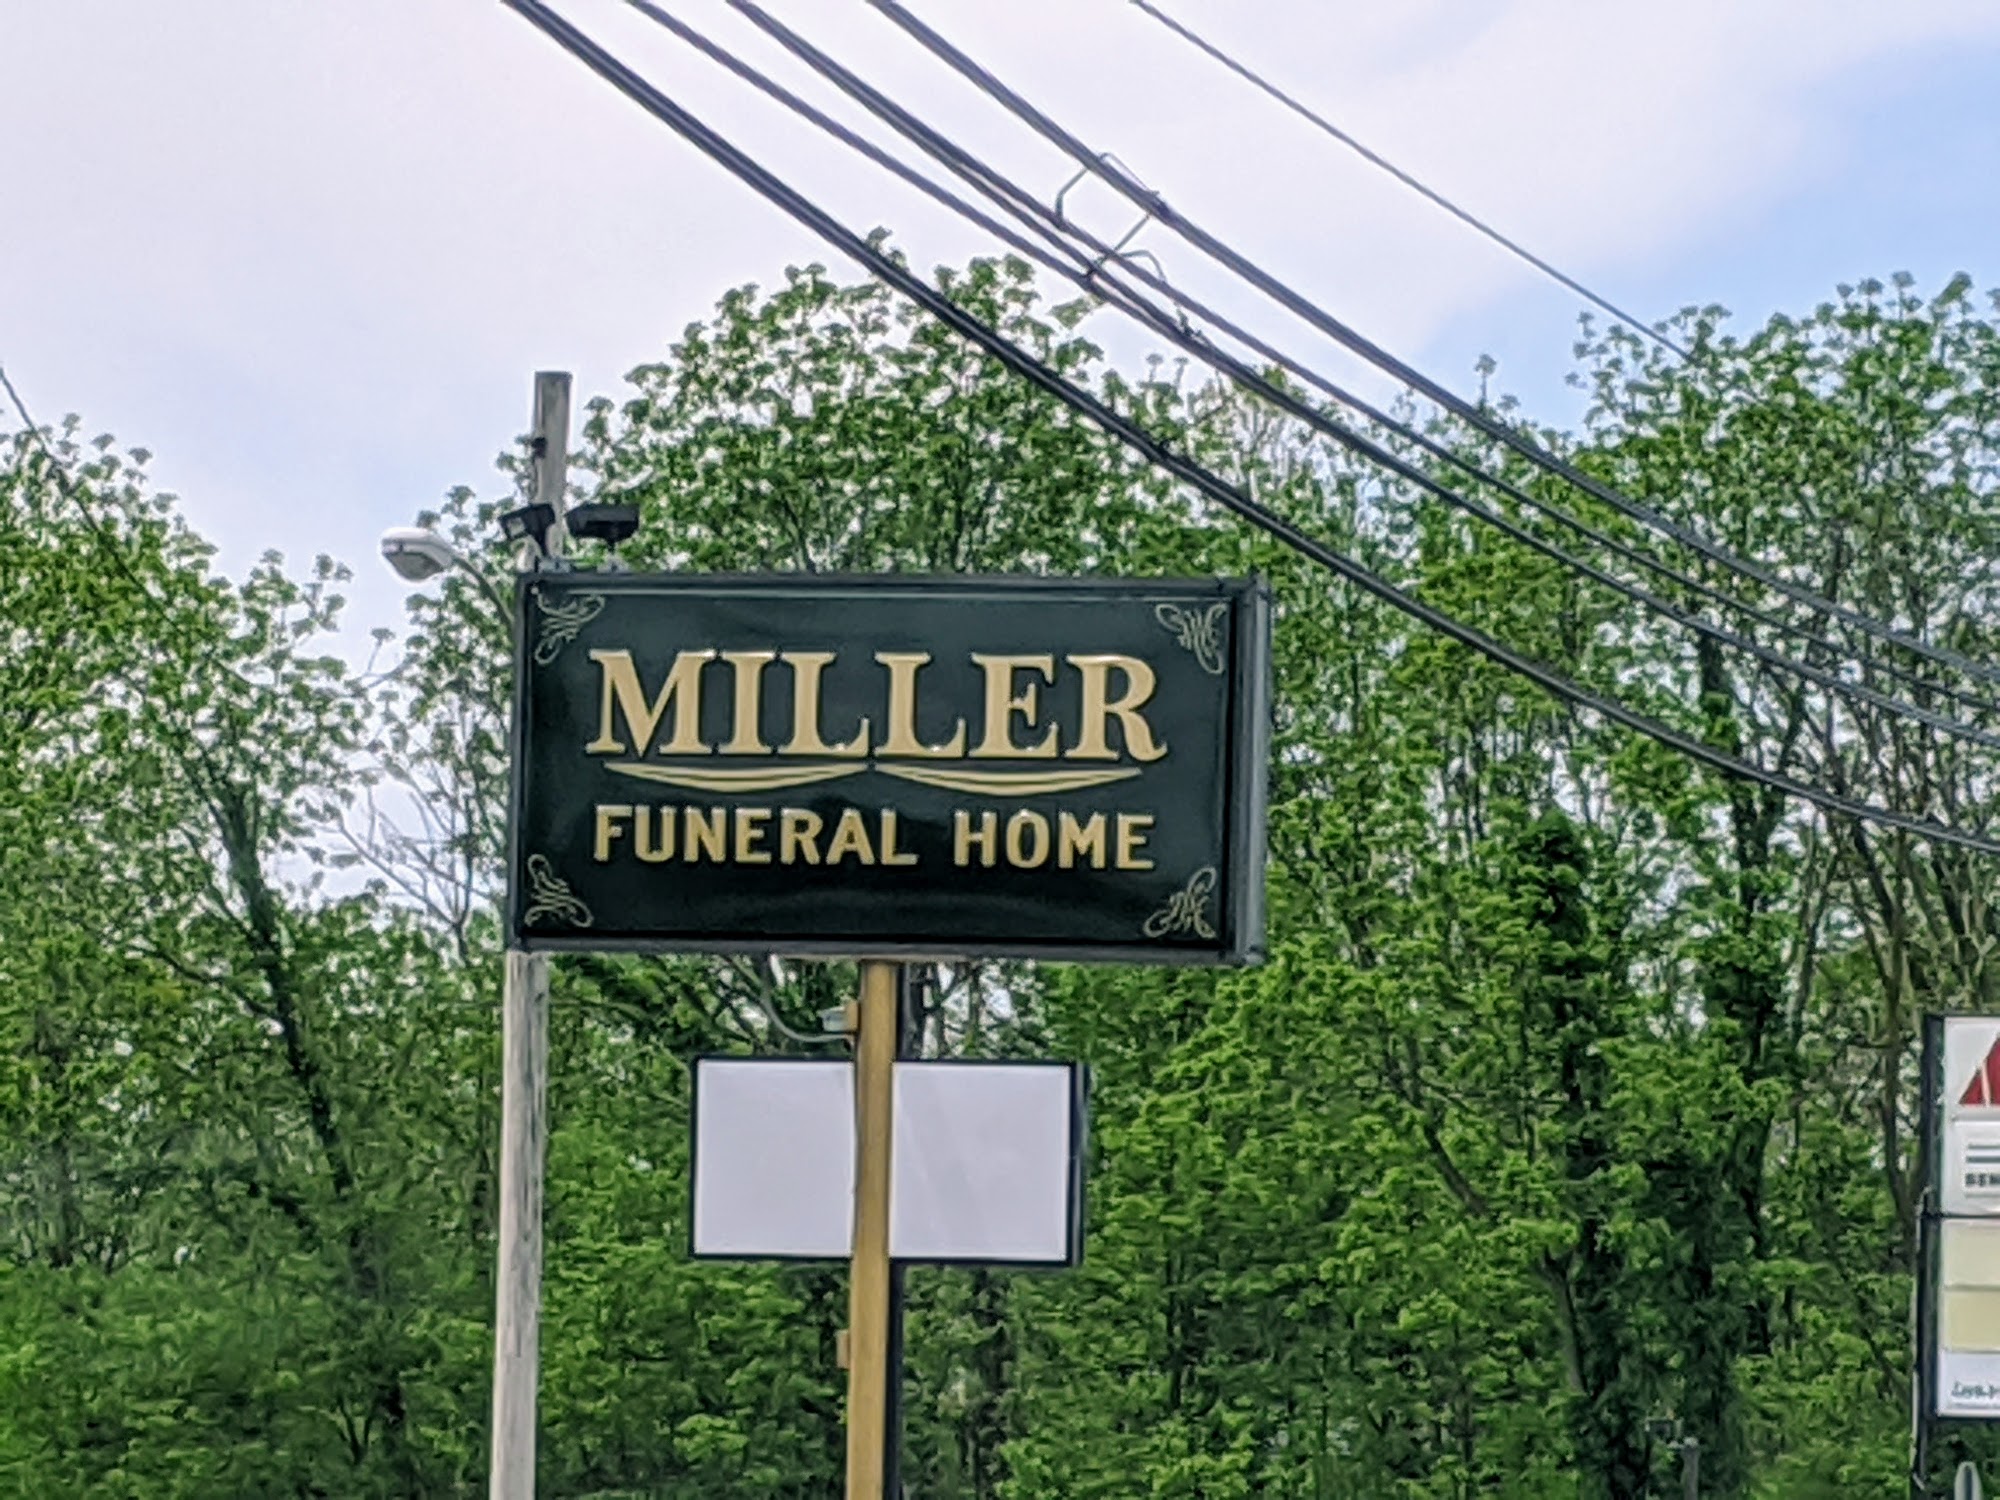 Miller Funeral home 1605 Celina Rd, St Marys Ohio 45885